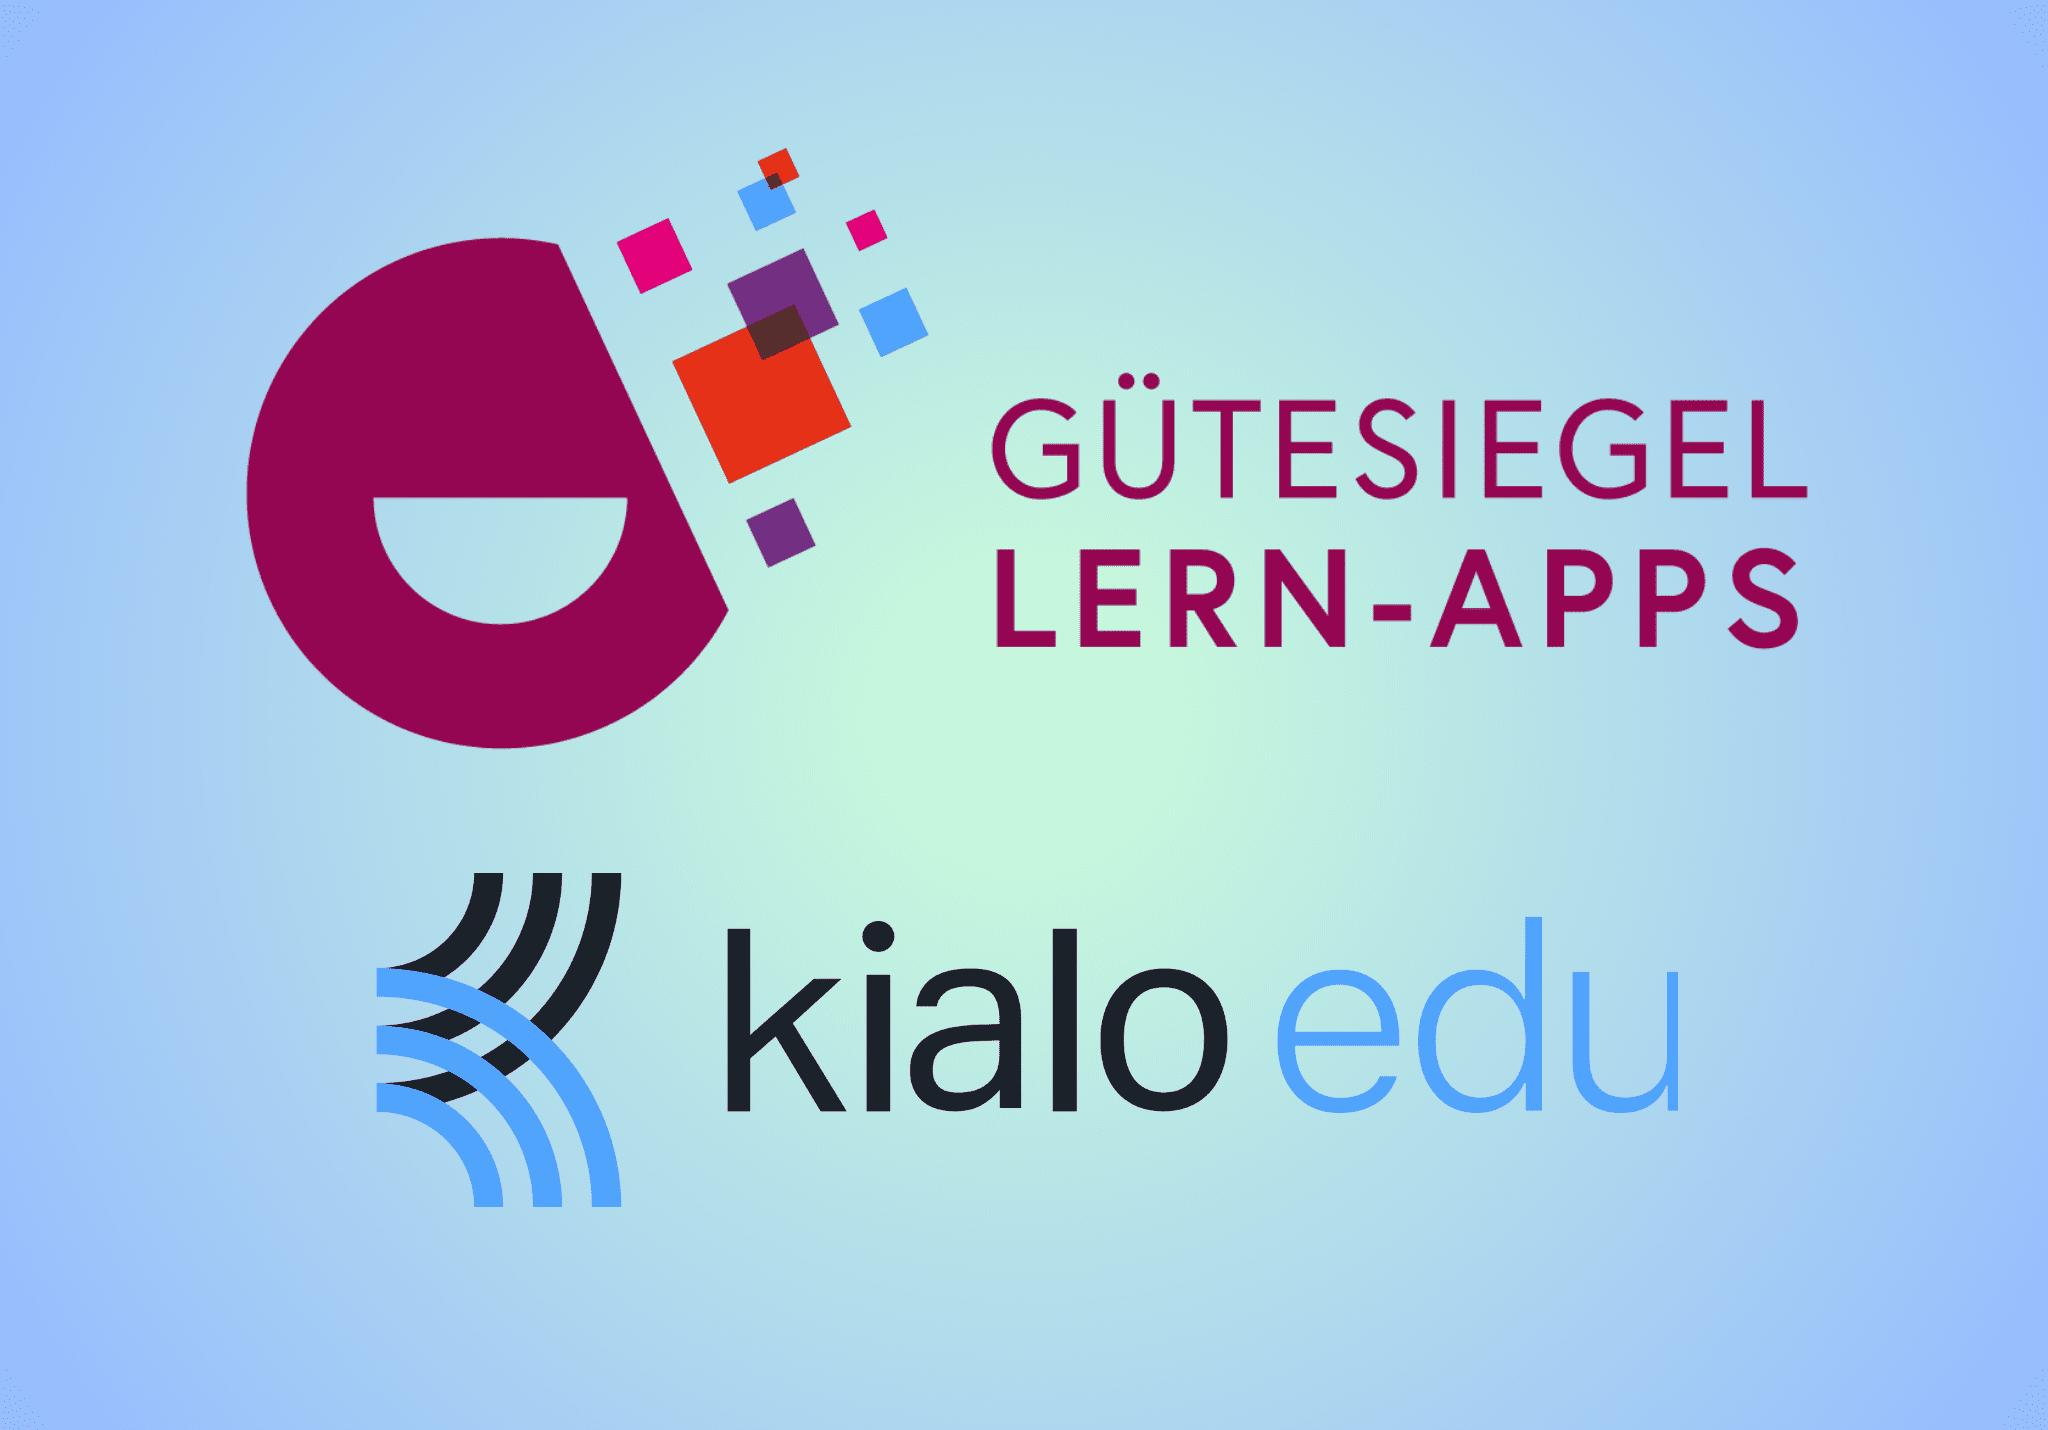 Kialo Edu receives the Learning Apps Seal of Approval from the Austrian Ministry of Education